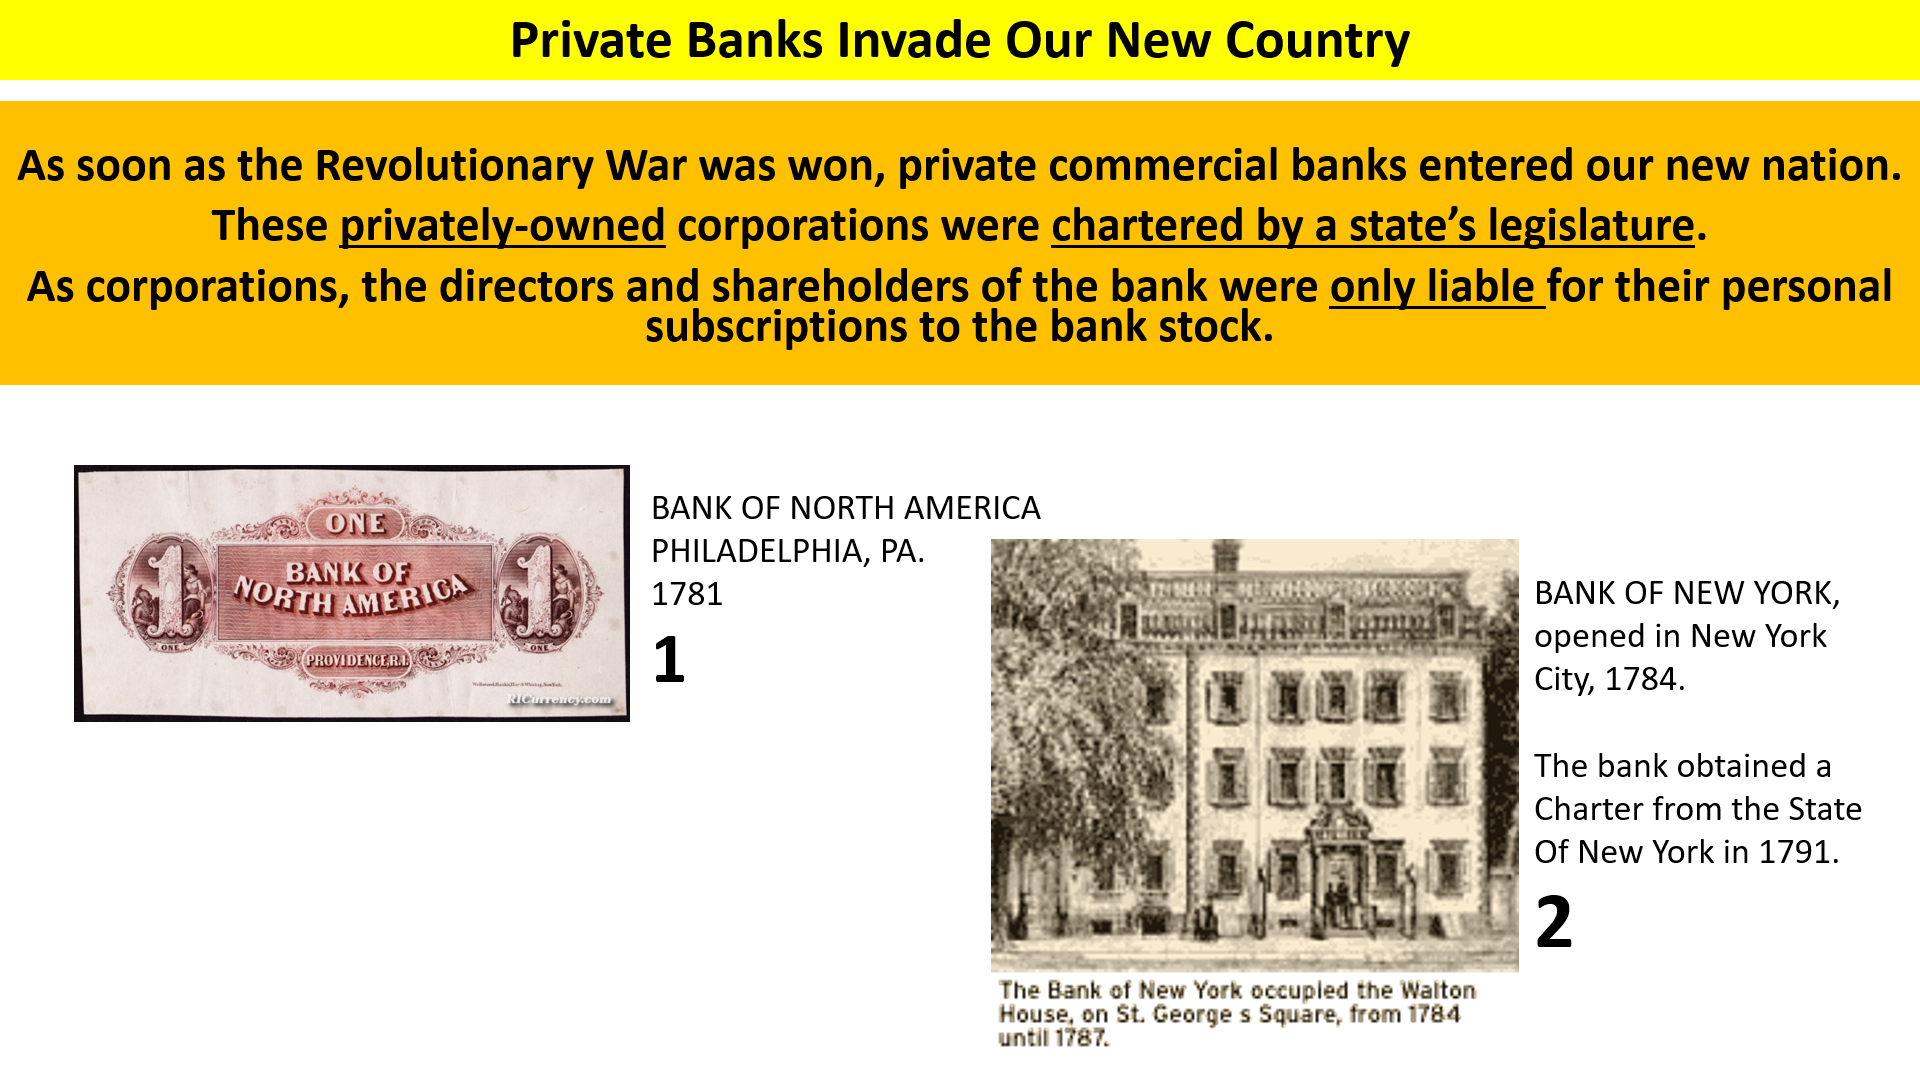 private banks are chartered by some states